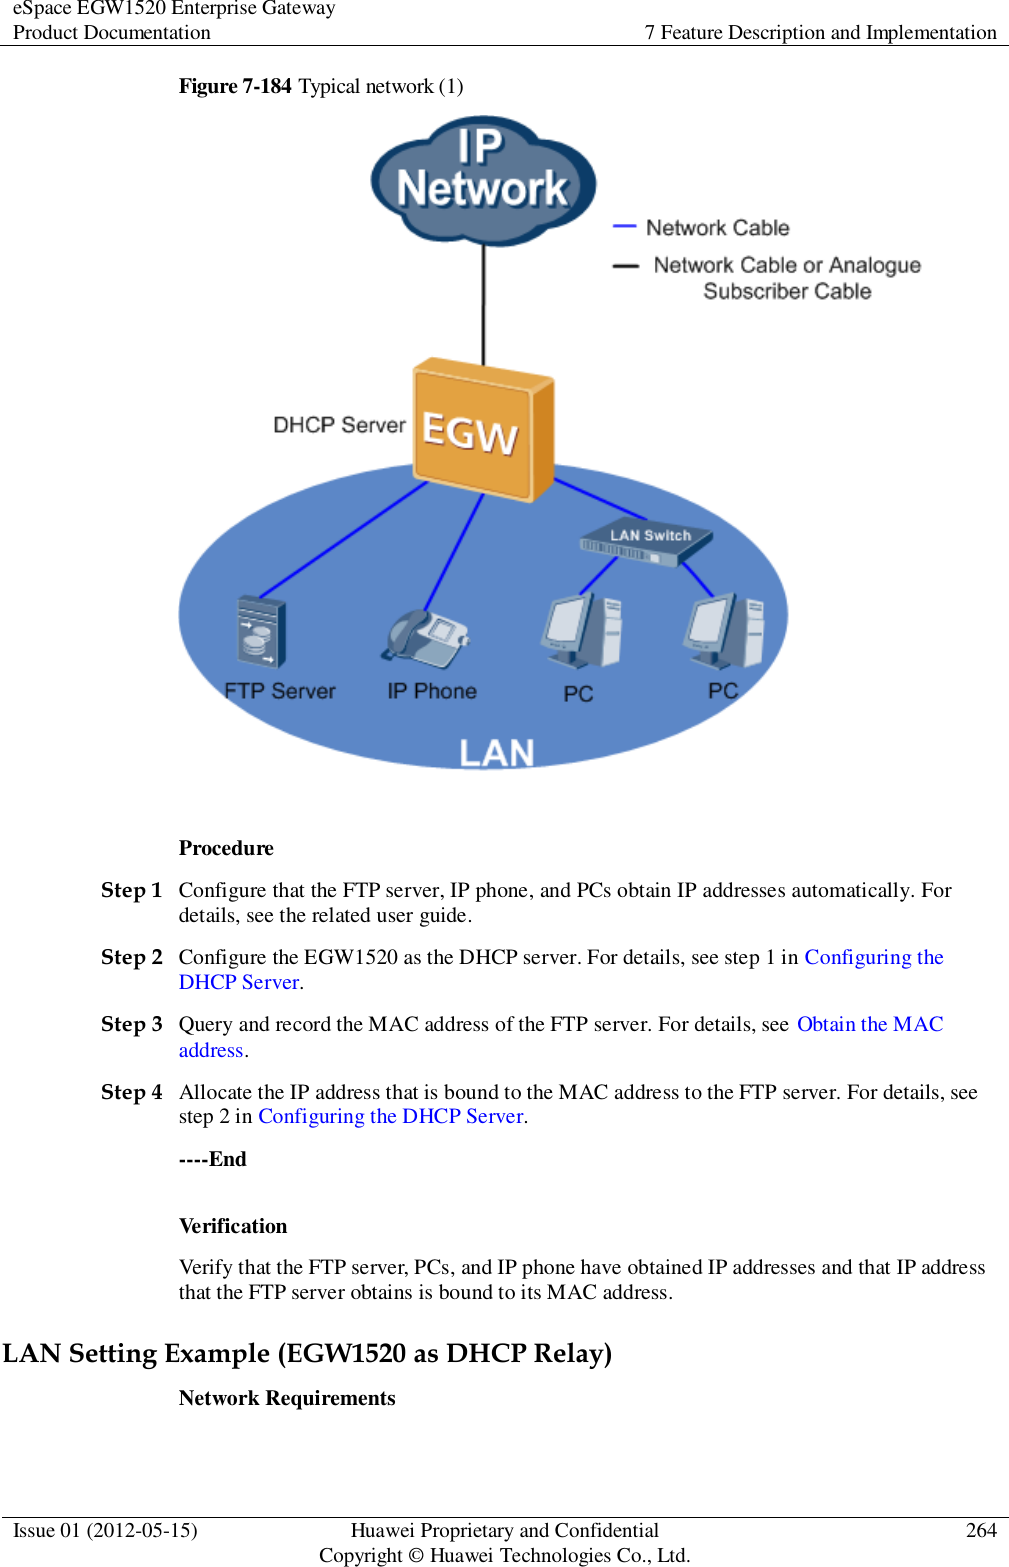 eSpace EGW1520 Enterprise Gateway Product Documentation 7 Feature Description and Implementation  Issue 01 (2012-05-15) Huawei Proprietary and Confidential                                     Copyright © Huawei Technologies Co., Ltd. 264  Figure 7-184 Typical network (1)   Procedure Step 1 Configure that the FTP server, IP phone, and PCs obtain IP addresses automatically. For details, see the related user guide. Step 2 Configure the EGW1520 as the DHCP server. For details, see step 1 in Configuring the DHCP Server. Step 3 Query and record the MAC address of the FTP server. For details, see Obtain the MAC address. Step 4 Allocate the IP address that is bound to the MAC address to the FTP server. For details, see step 2 in Configuring the DHCP Server. ----End Verification Verify that the FTP server, PCs, and IP phone have obtained IP addresses and that IP address that the FTP server obtains is bound to its MAC address. LAN Setting Example (EGW1520 as DHCP Relay) Network Requirements 